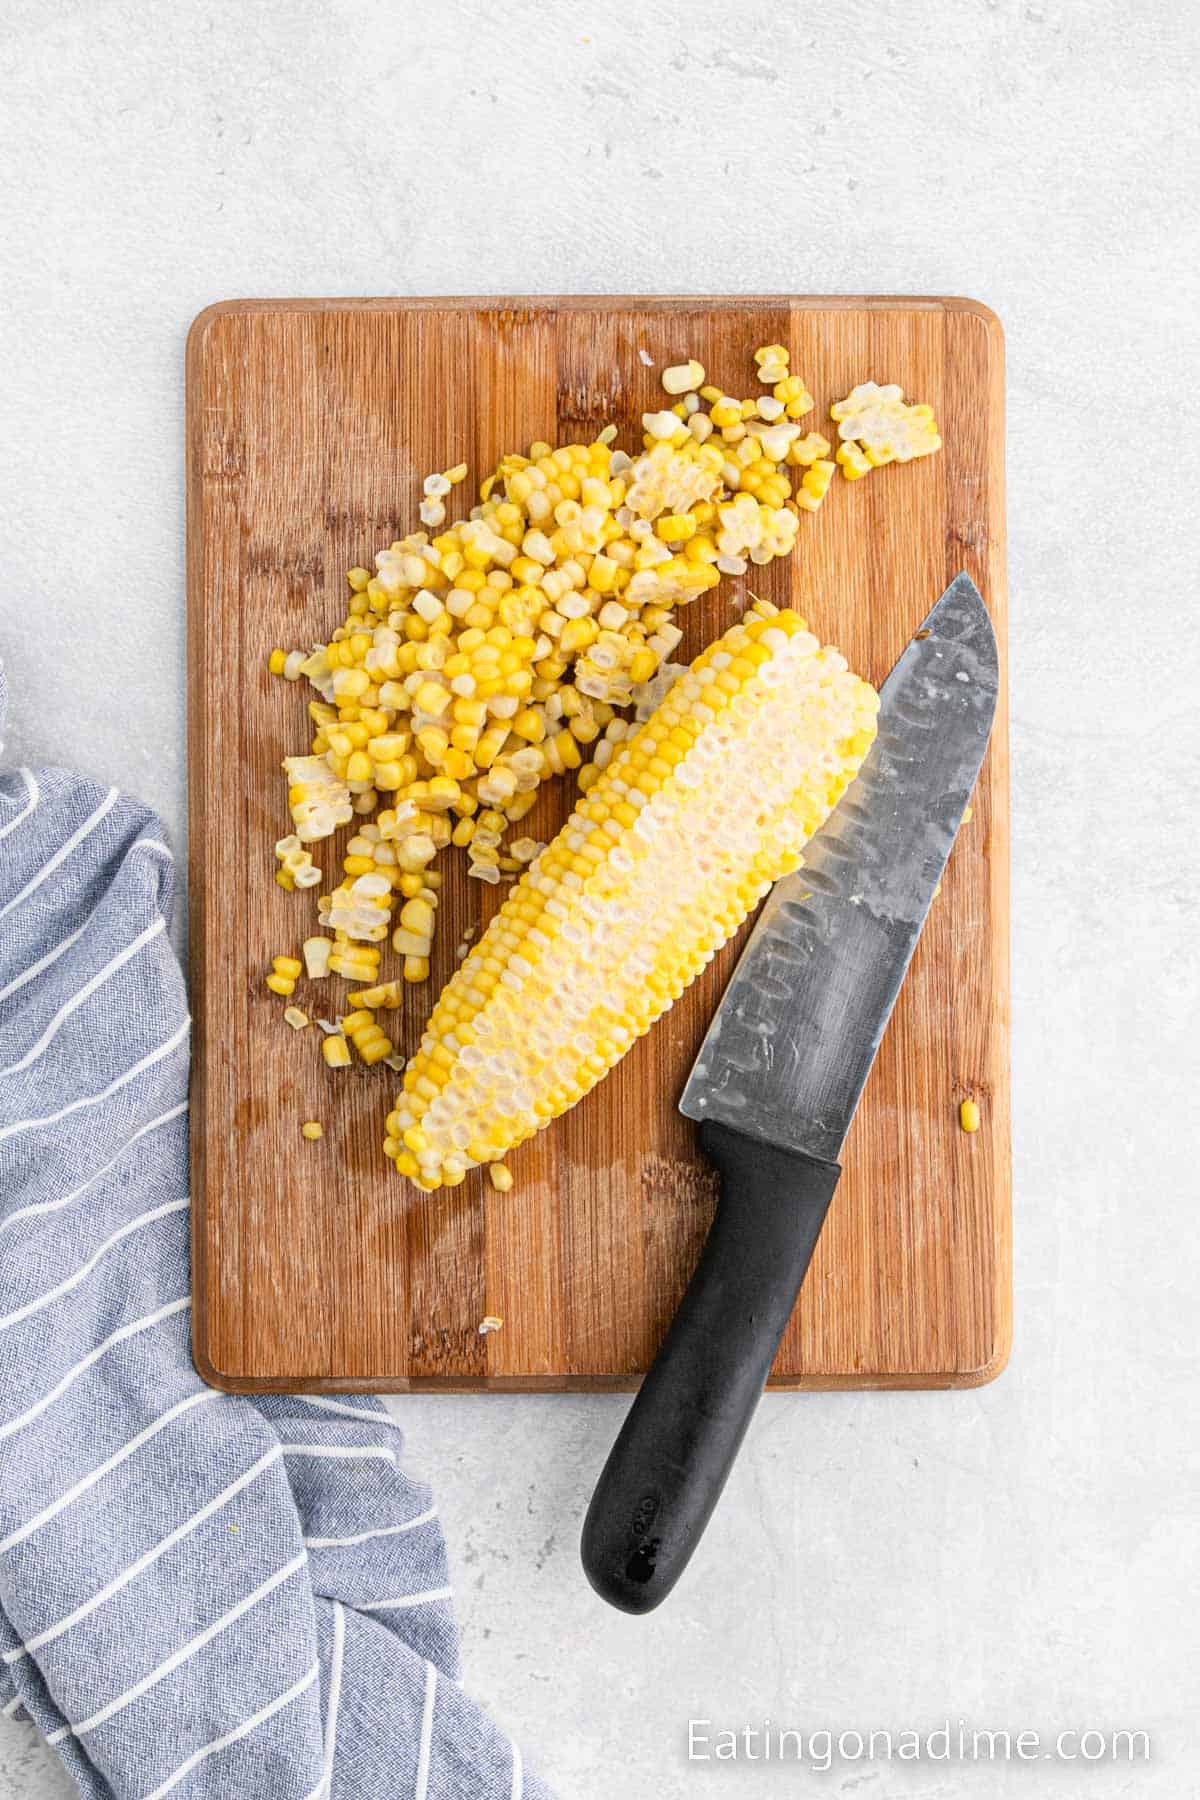 Cutting the corn kernels off the fresh corn on a cutting board and knife